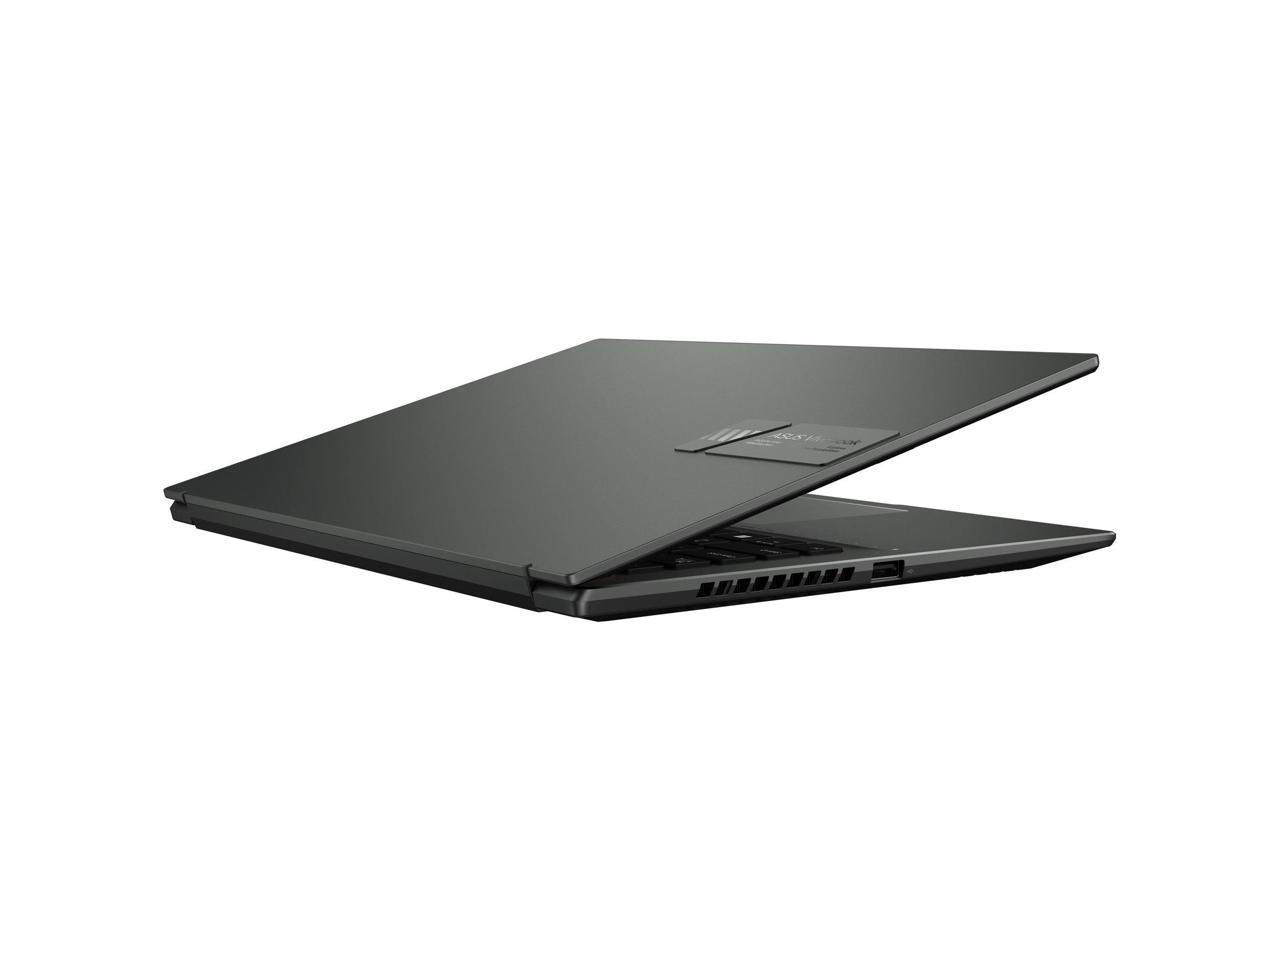 Asus Vivobook S 14X OLED S5402 S5402ZA-DB51 14.5" Notebook - 2.8K - 2880 x 1800 - Intel Core i5 12th Gen i5-12500H Dodeca-core (12 Core) 2.50 GHz - 8 GB Total RAM - 512 GB SSD - Intel Chip - Inte